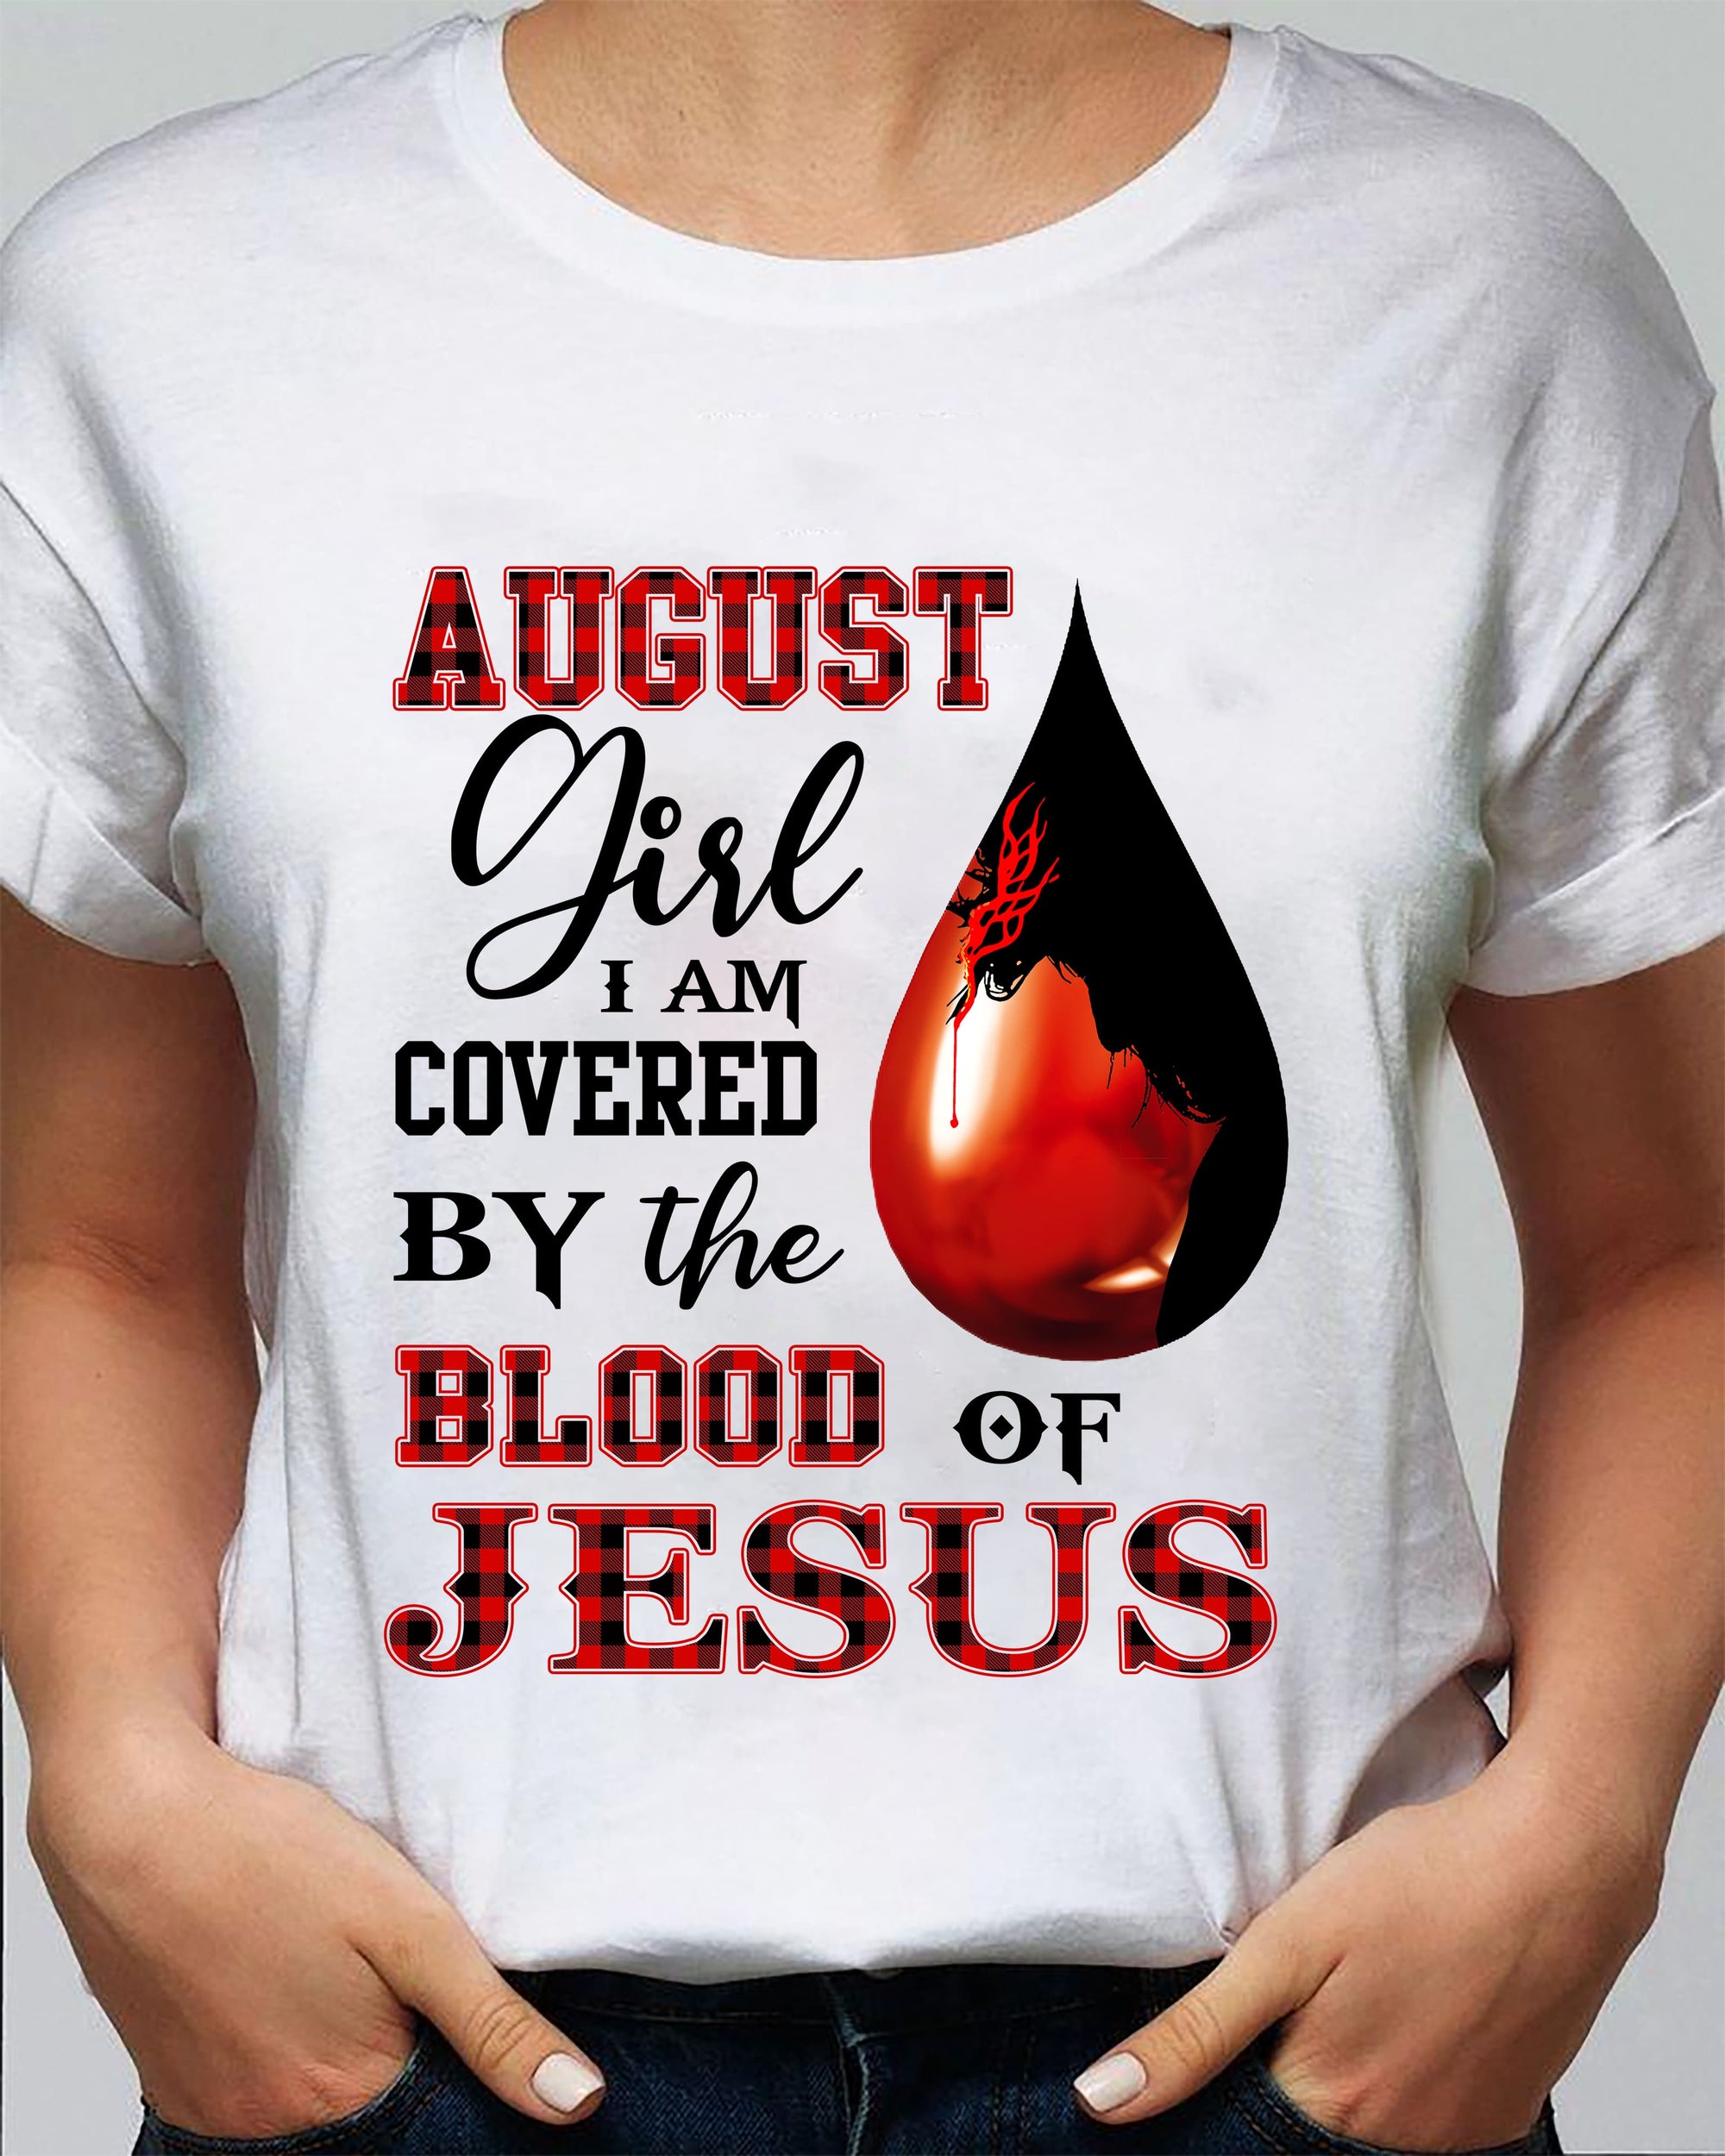 August, August Girl, Jesus - I'm covered by the blood of Jesus White Apparel